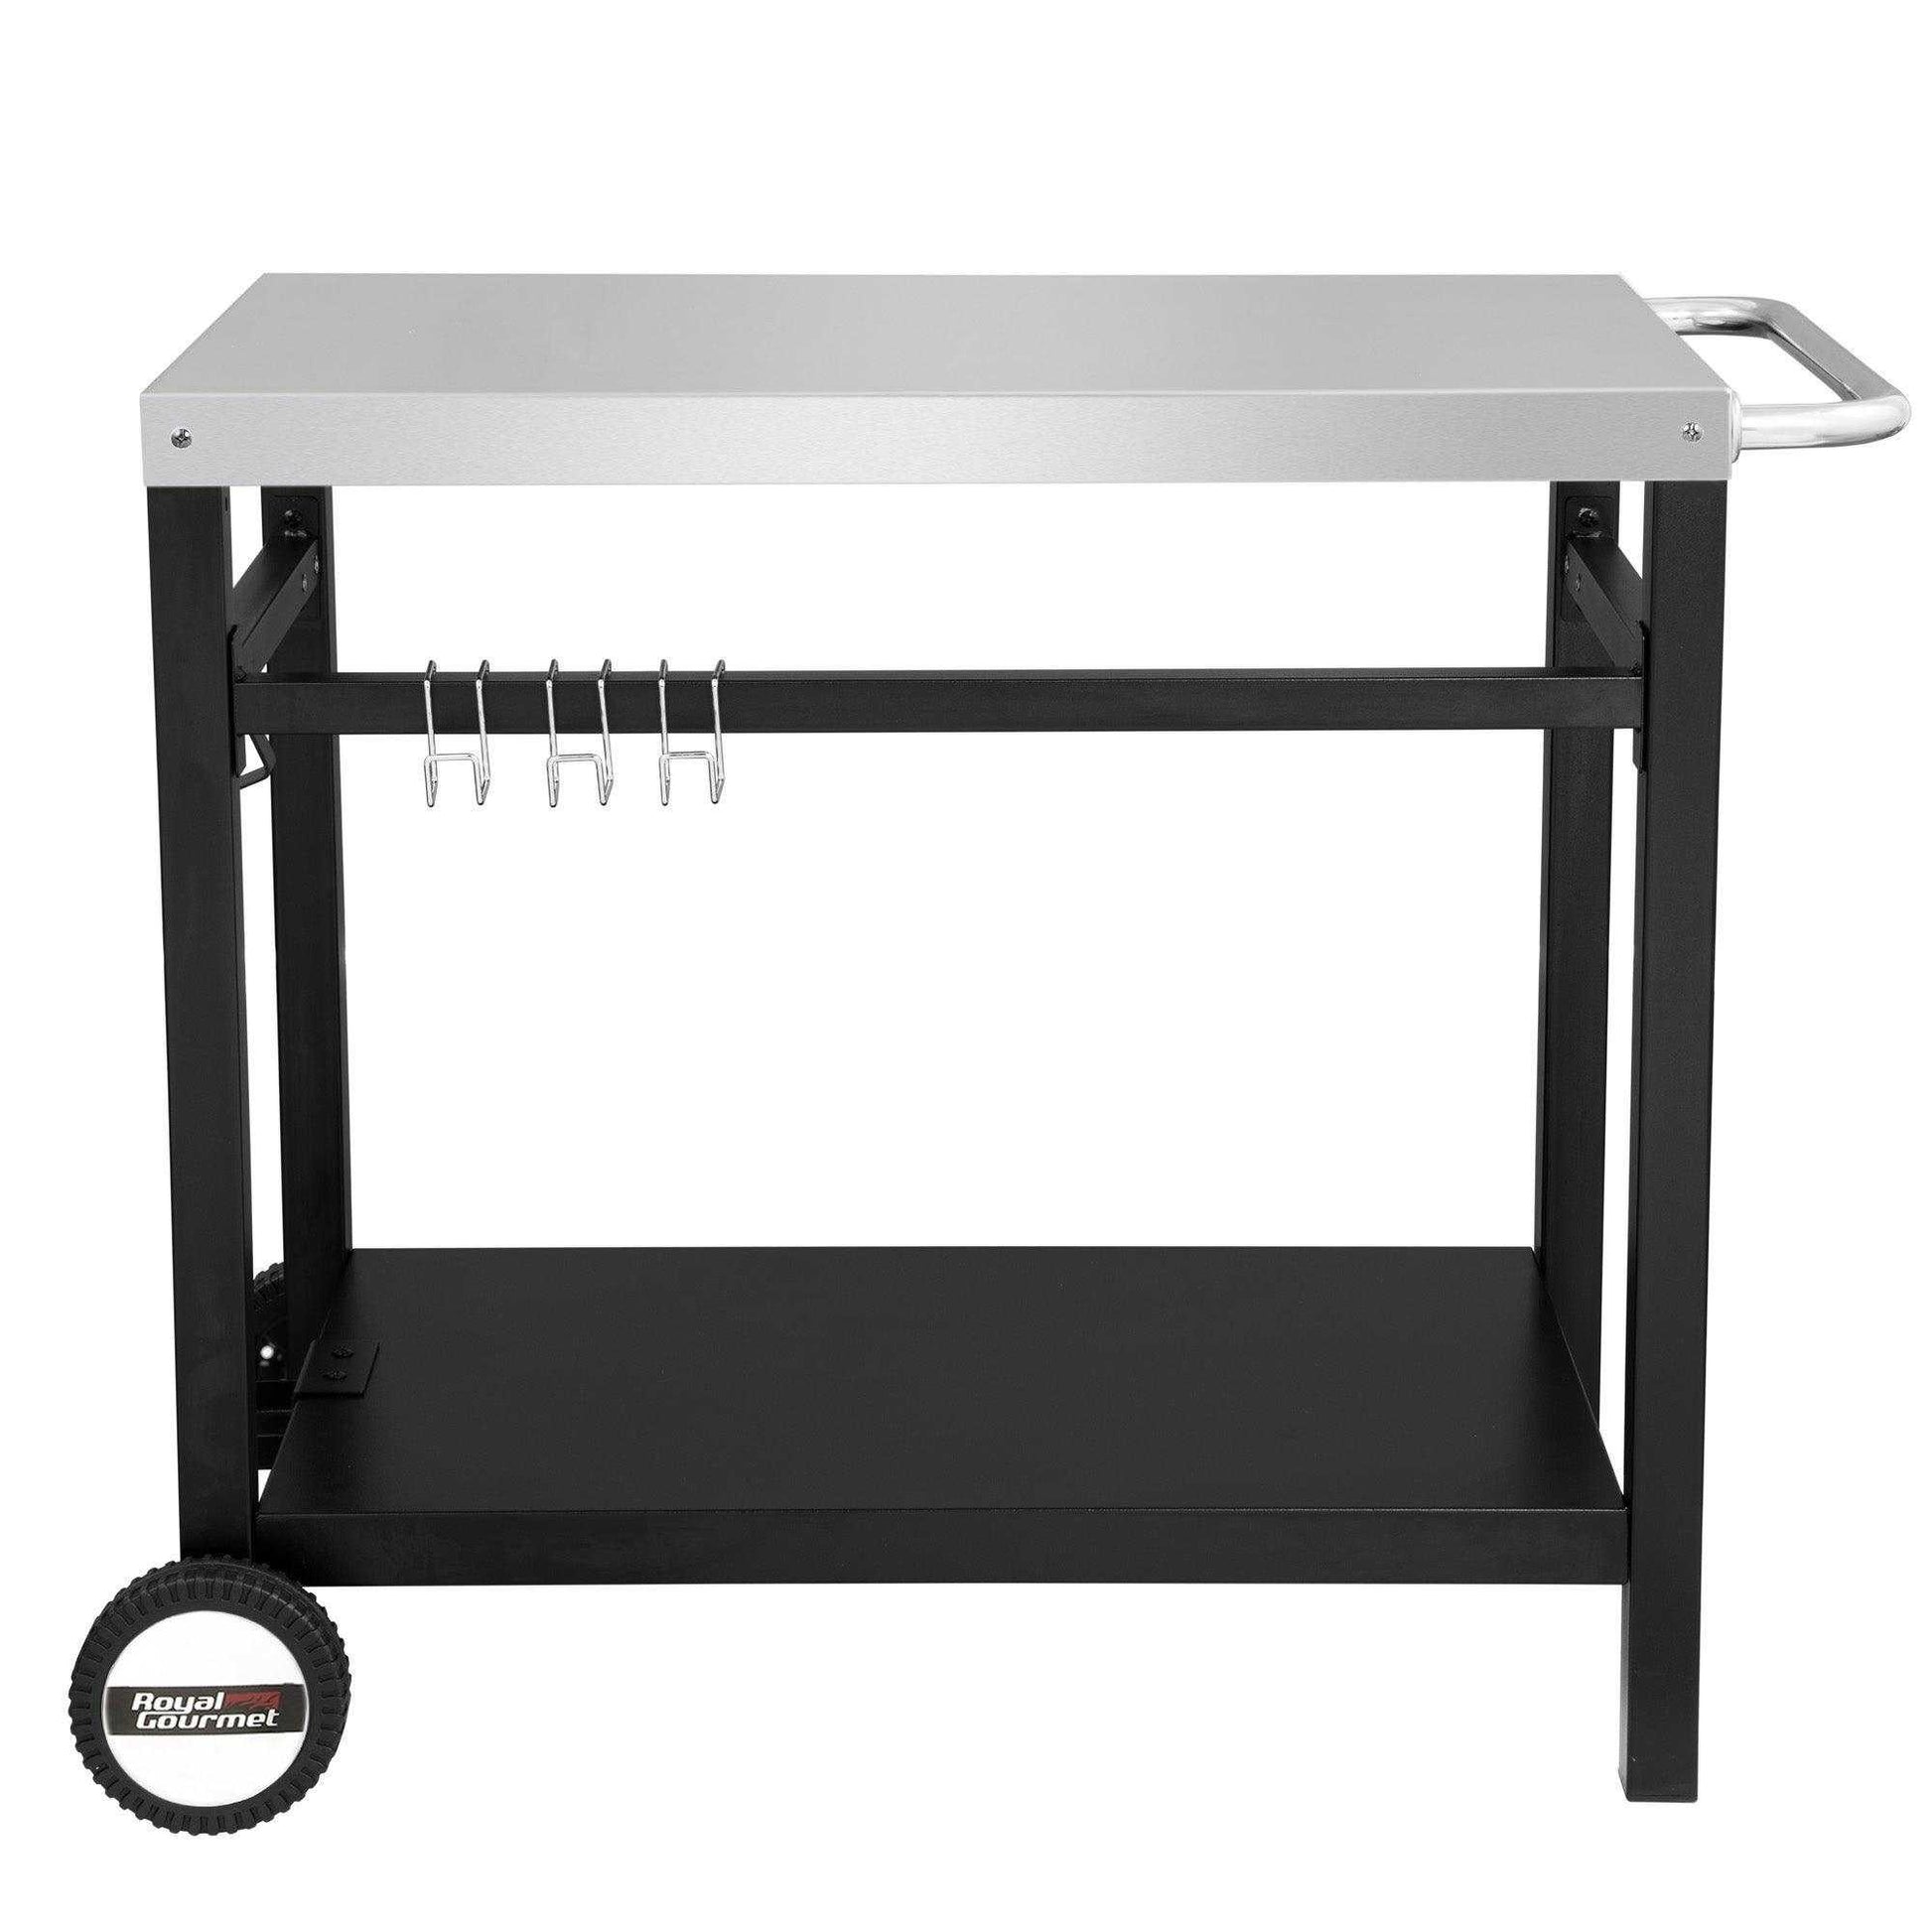 Double Shelf Stainless Steel Grill Cart with Wheels - Royal Gourmet